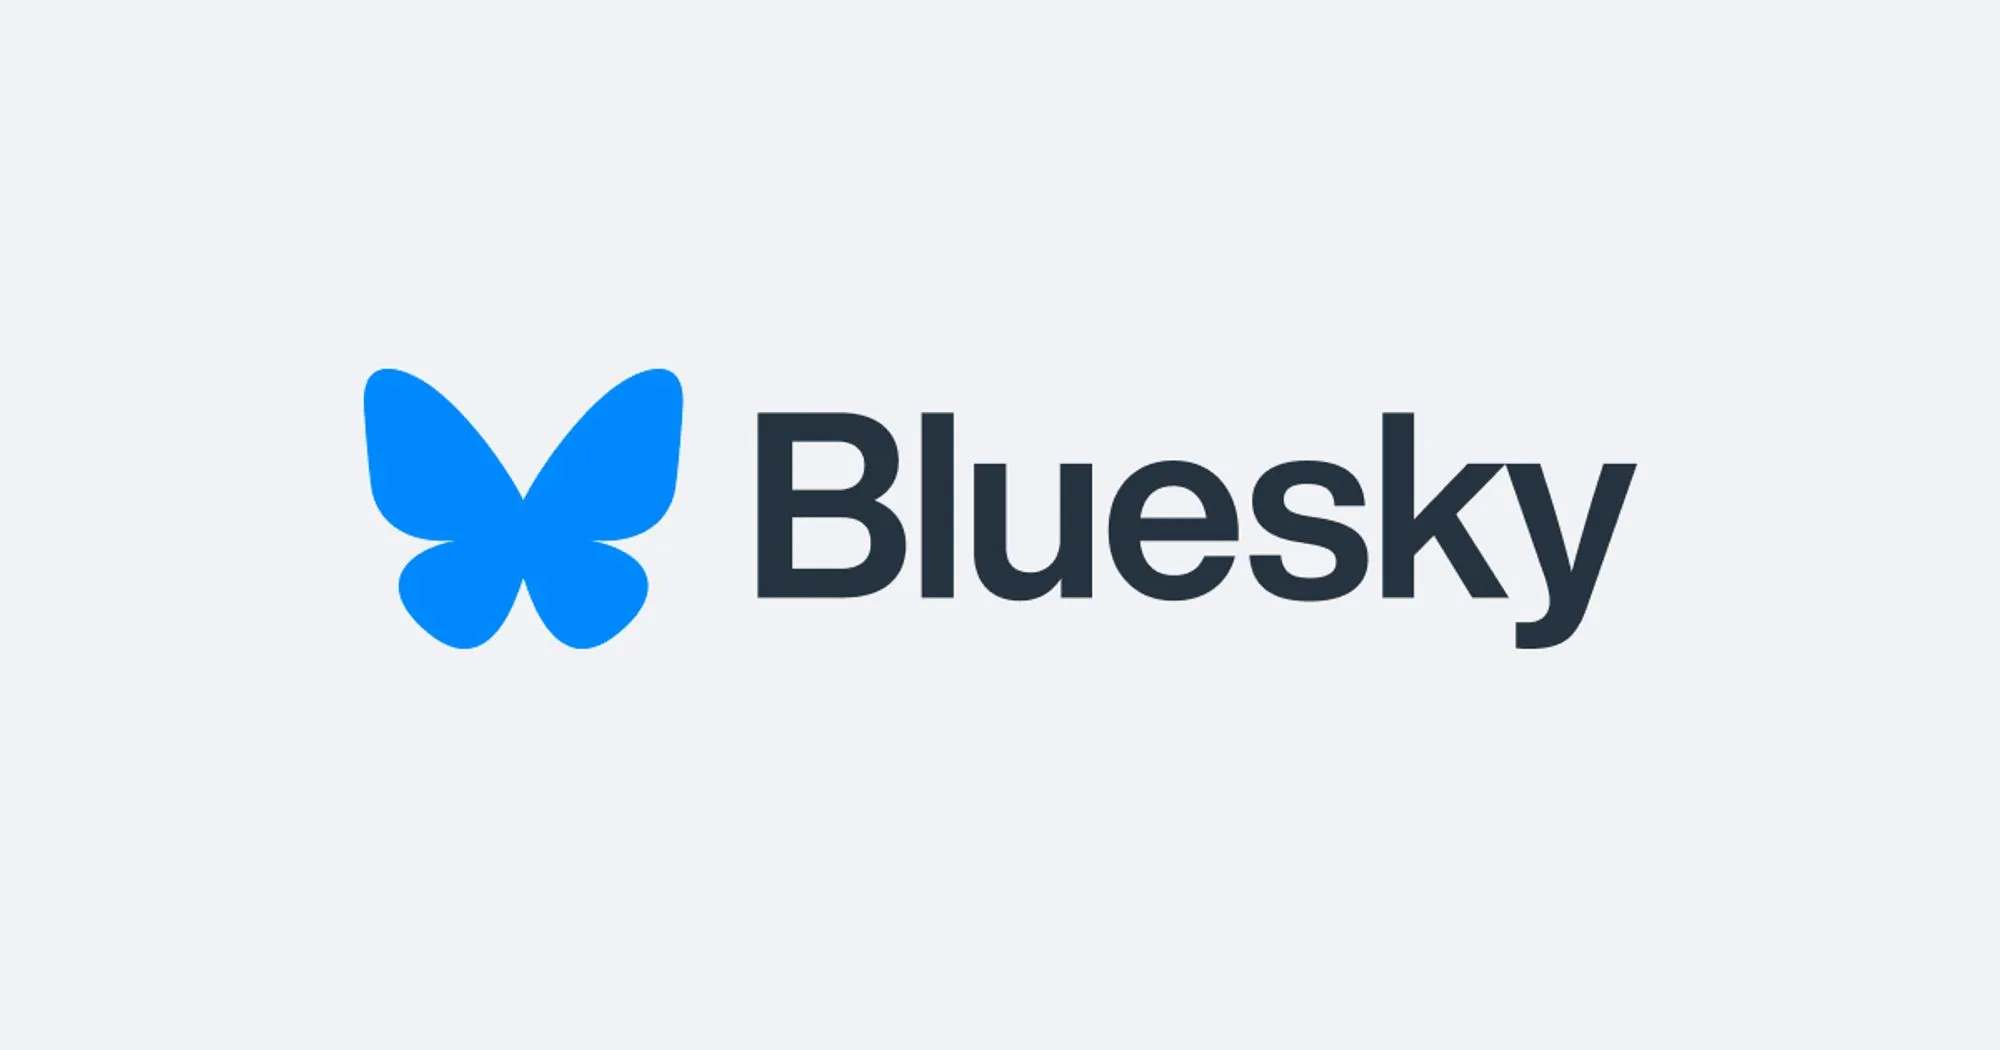 Bluesky has added nearly 1 million users since its public launch